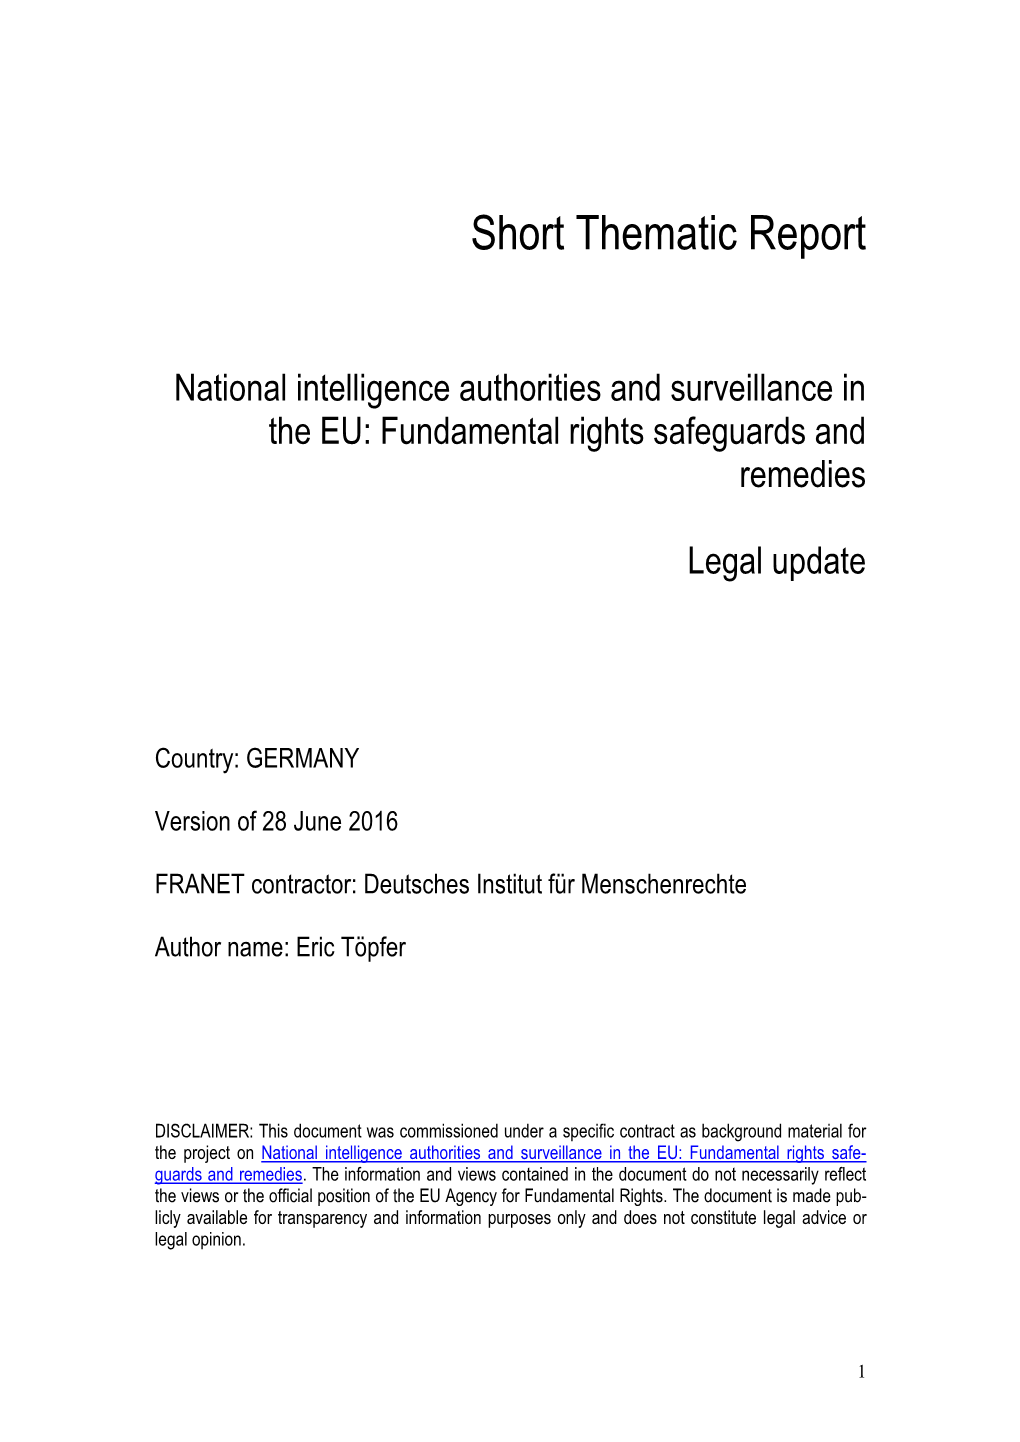 National Intelligence Authorities and Surveillance in the EU: Fundamental Rights Safeguards and Remedies